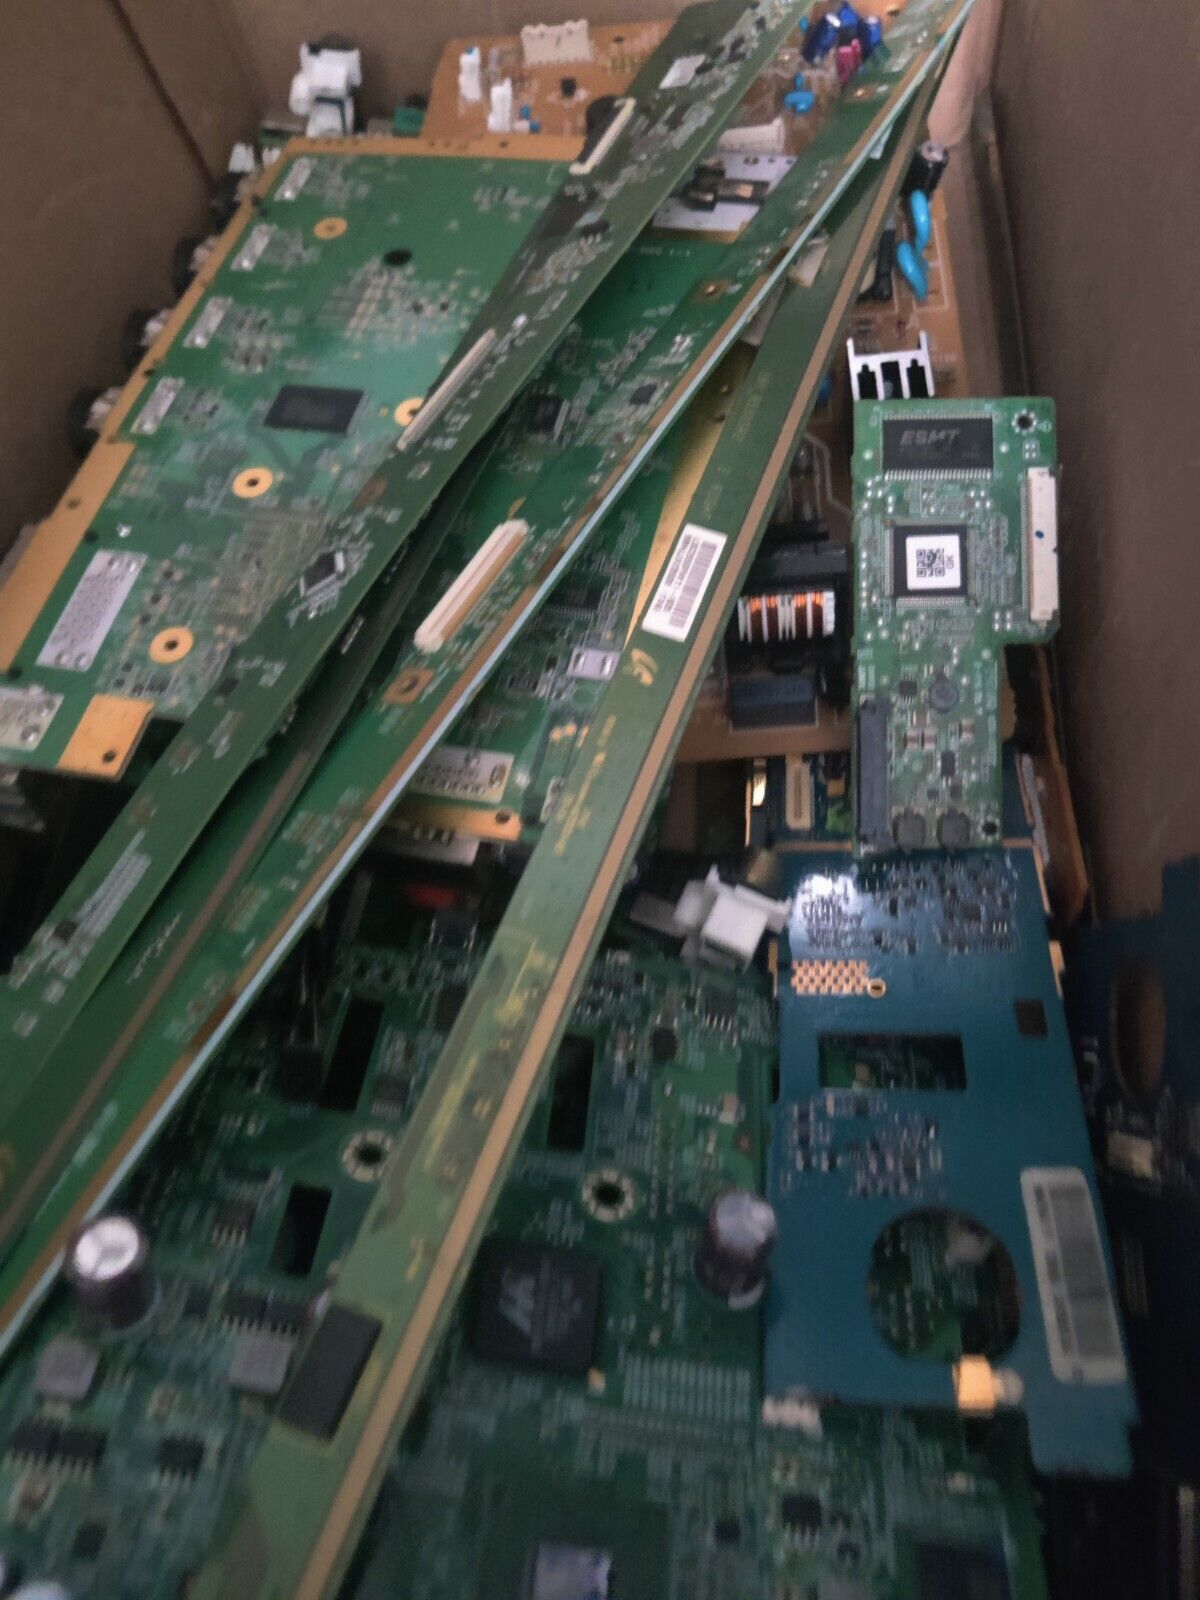 Lot of about 7.5 Lbs+ printed circuit boards Scrap  Gold and Silver Recovery Wii